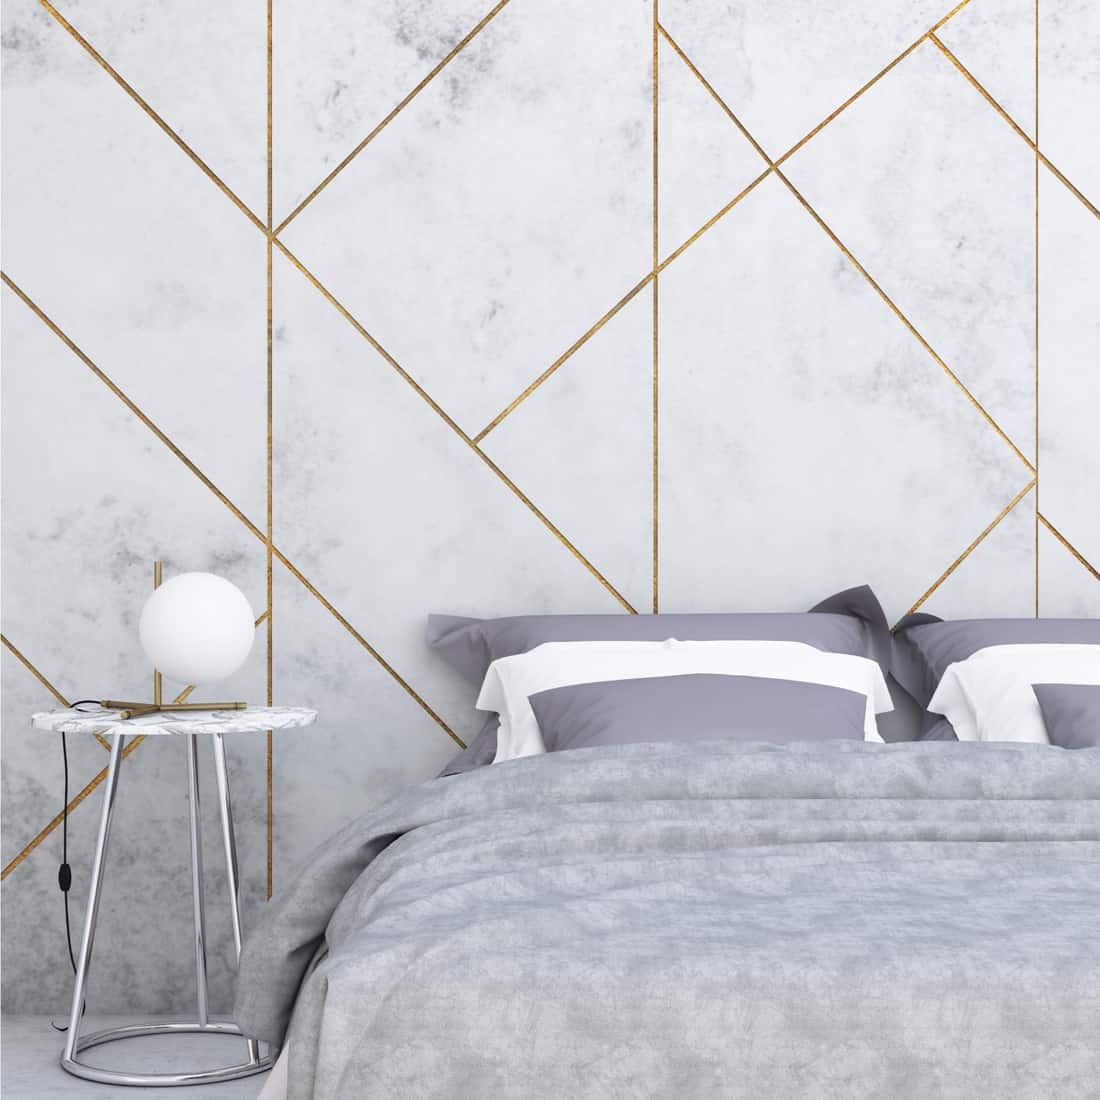 Marble masterpiece of a wall design for a gray and white bedroom